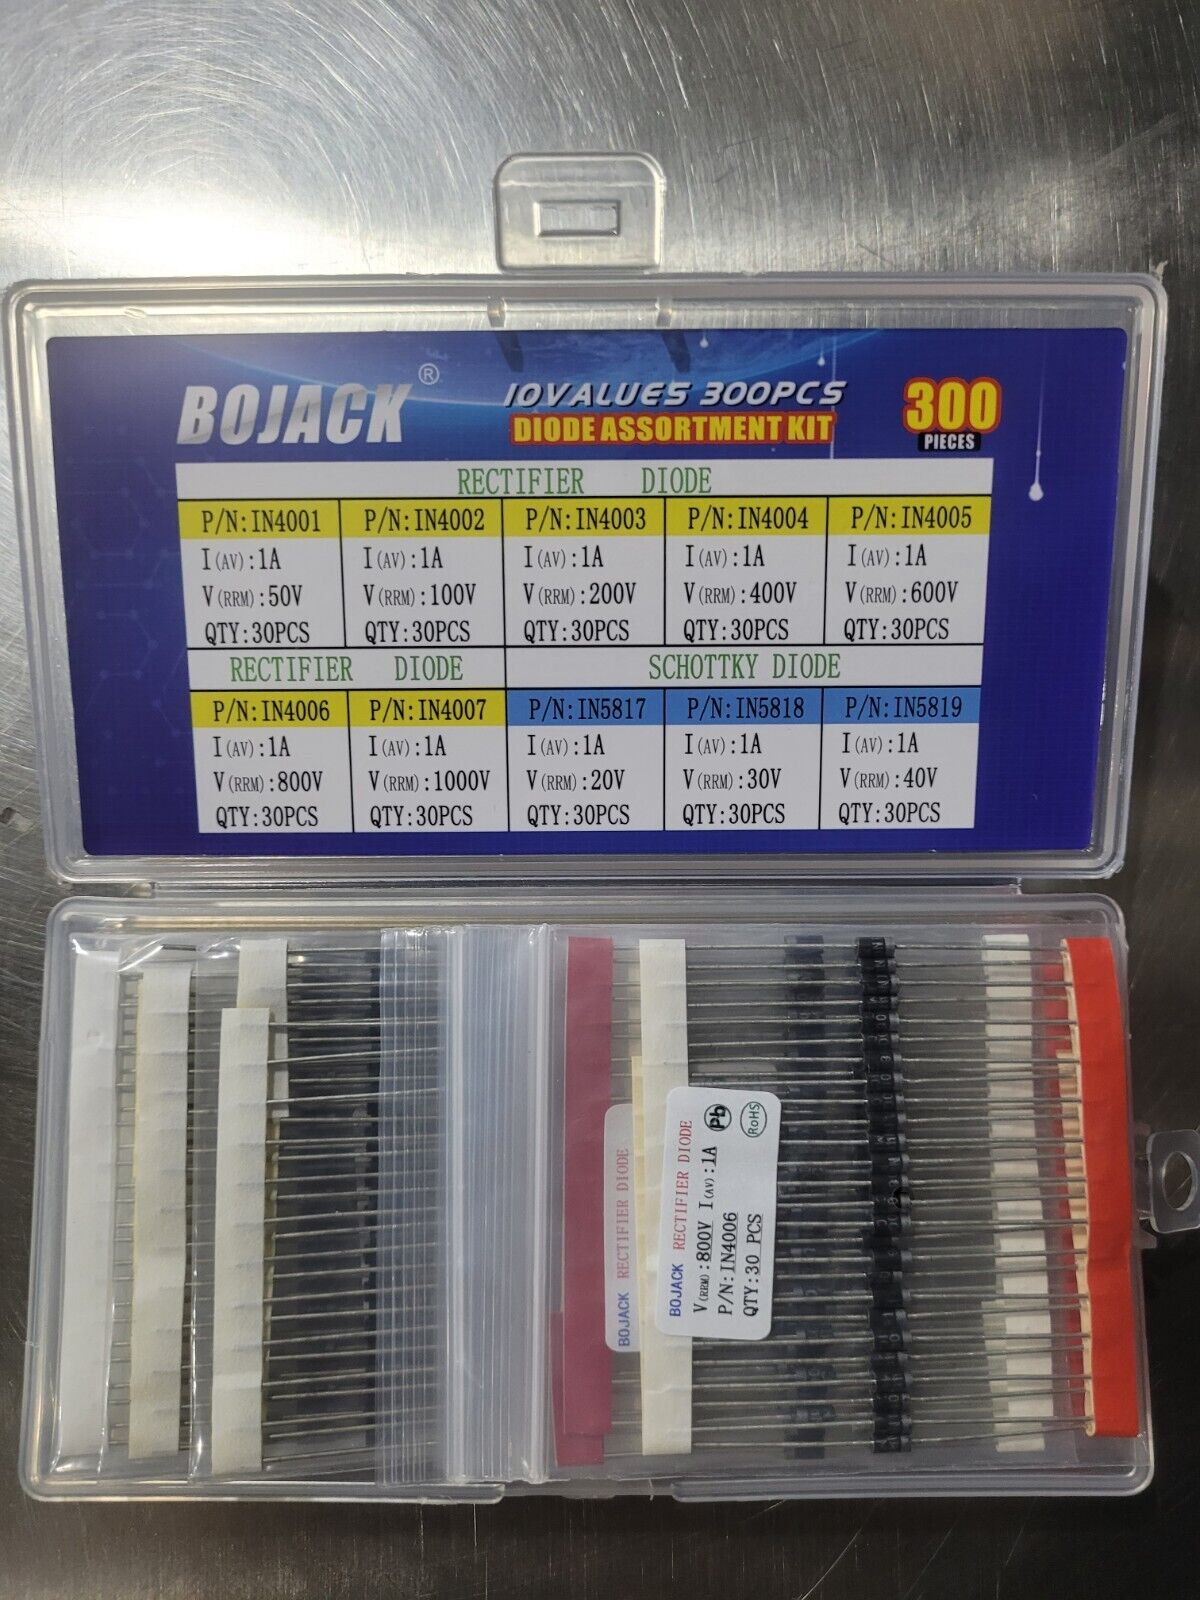 BOJACK 10 Values 300 pcs Rectifier Diodes IN4001-4002-4003-4004-4005 plus more